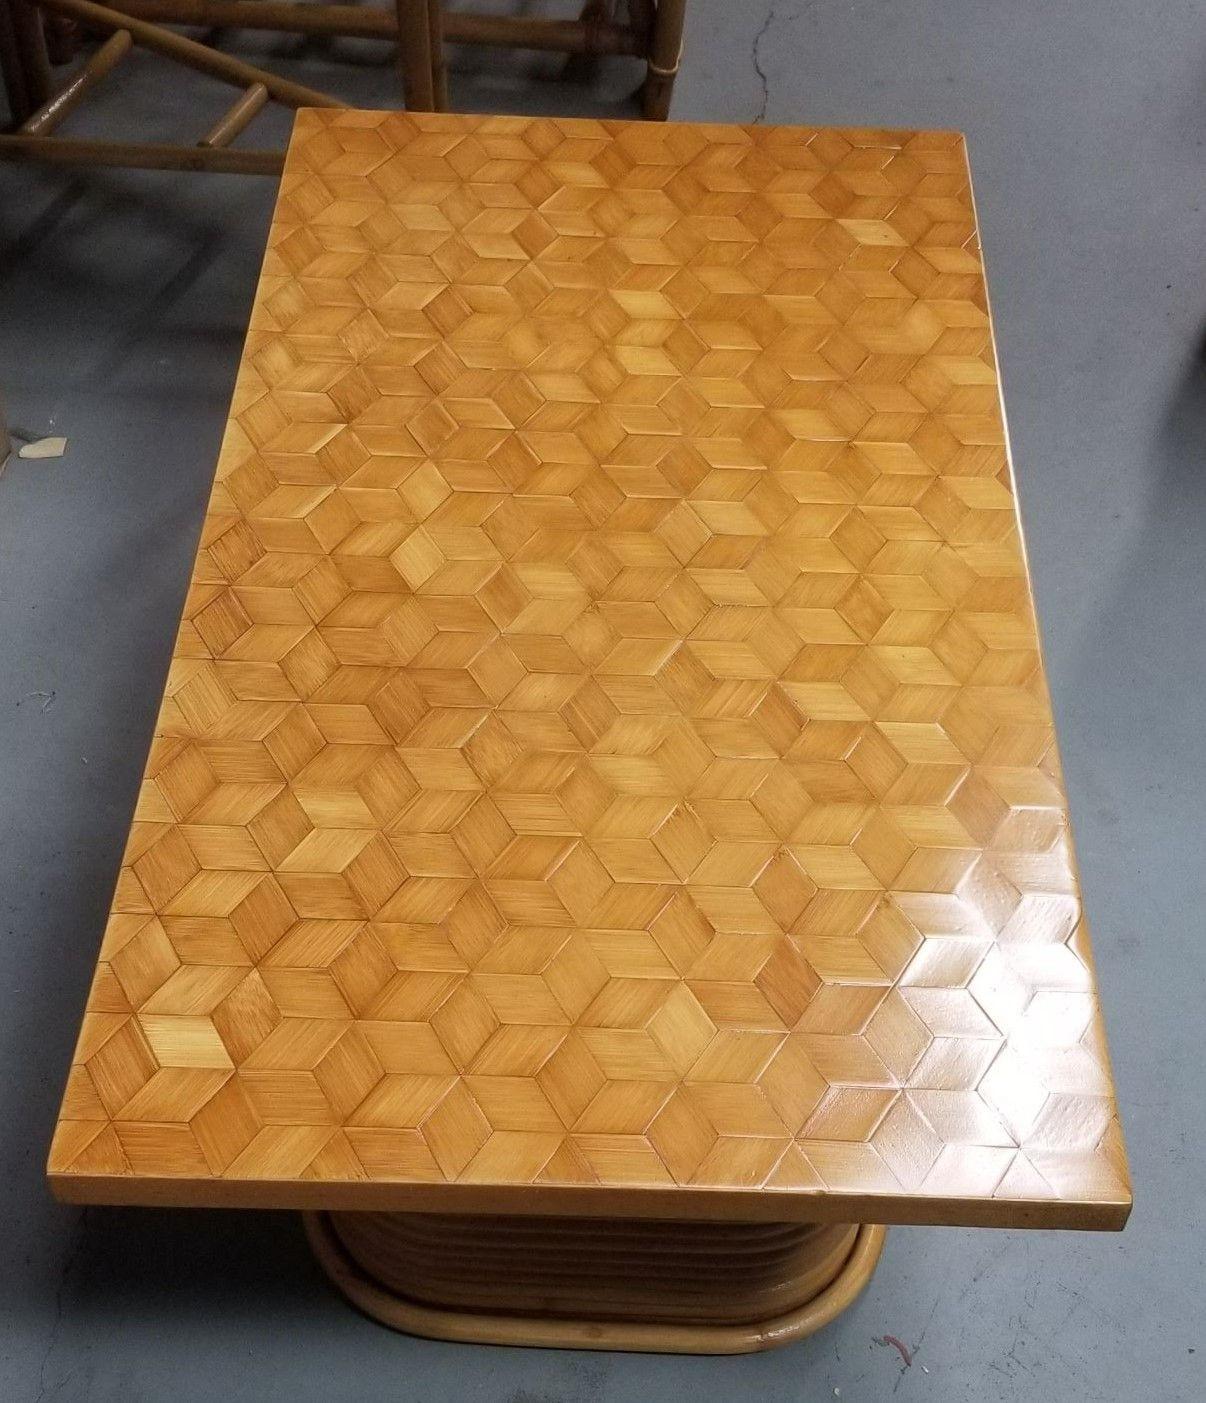 Restored Rattan Cube Pattern Coffee Table Top with Stacked Pedestal Legs In Excellent Condition For Sale In Van Nuys, CA